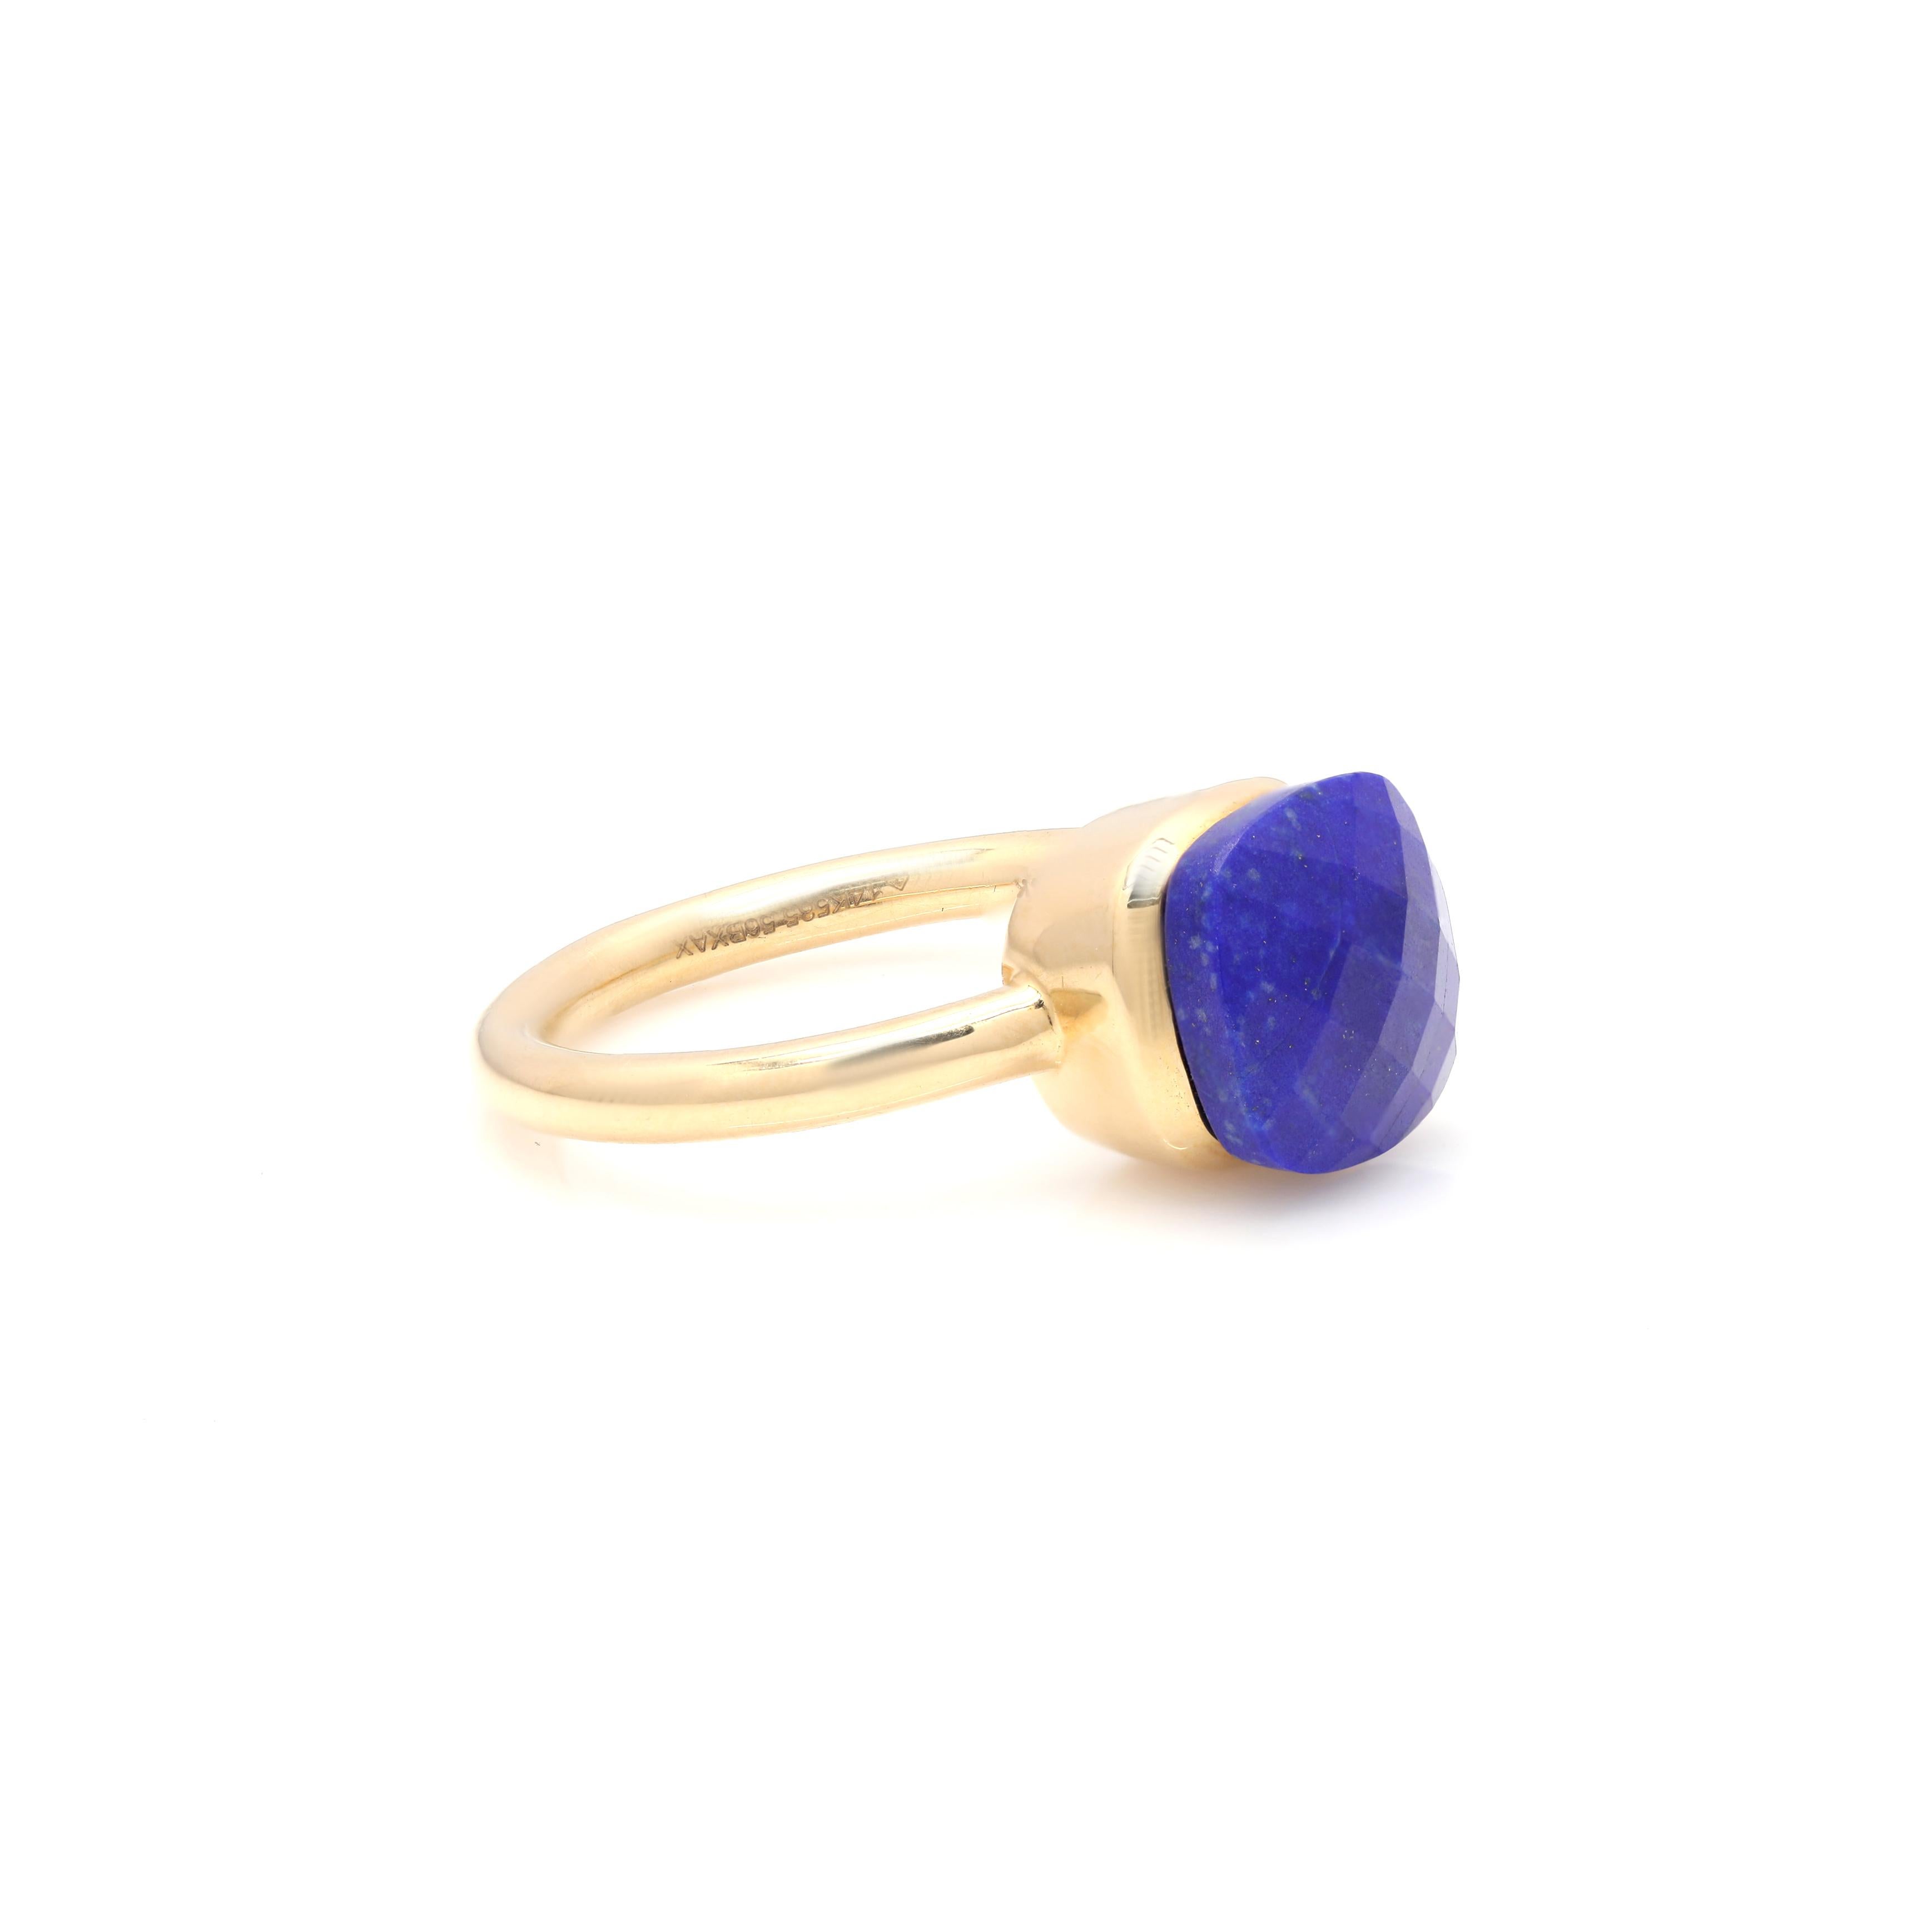 For Sale:  6.9 Carat Cushion Lapis Lazuli Ring in 14k Solid Yellow Gold Mens Jewelry 2